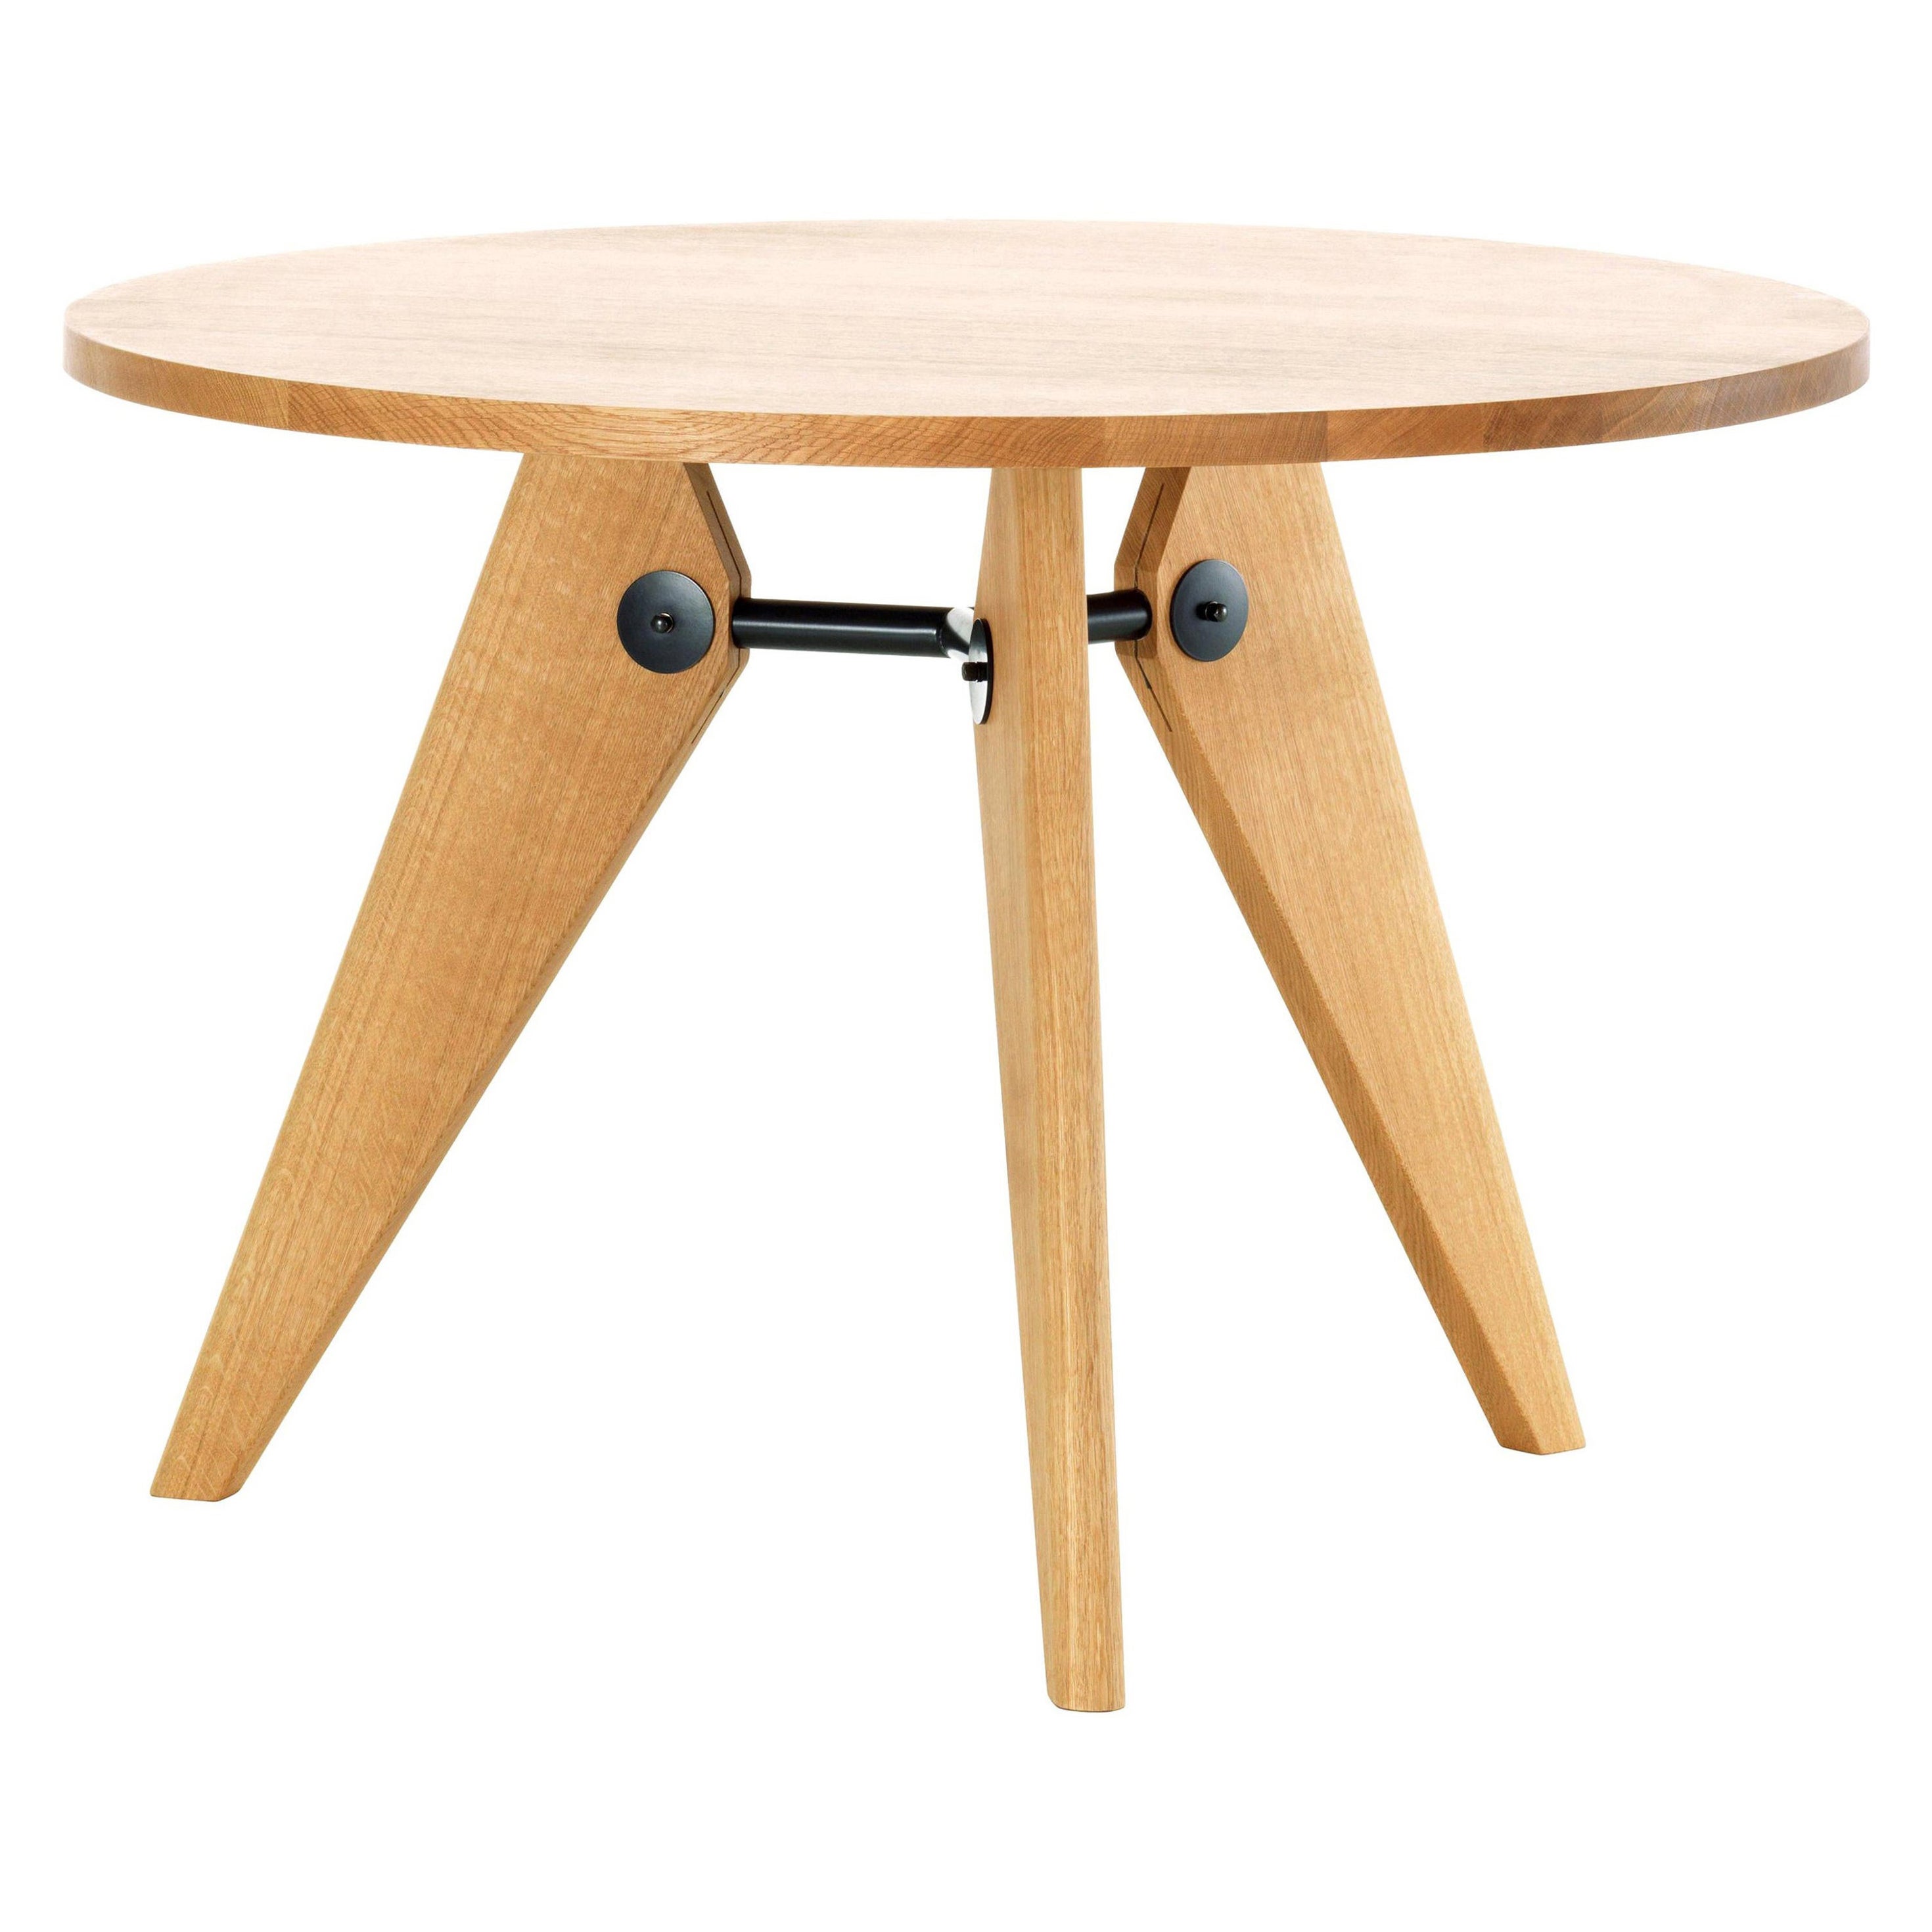 Small Jean Prouvé Guéridon Dining Table in Natural Oak for Vitra